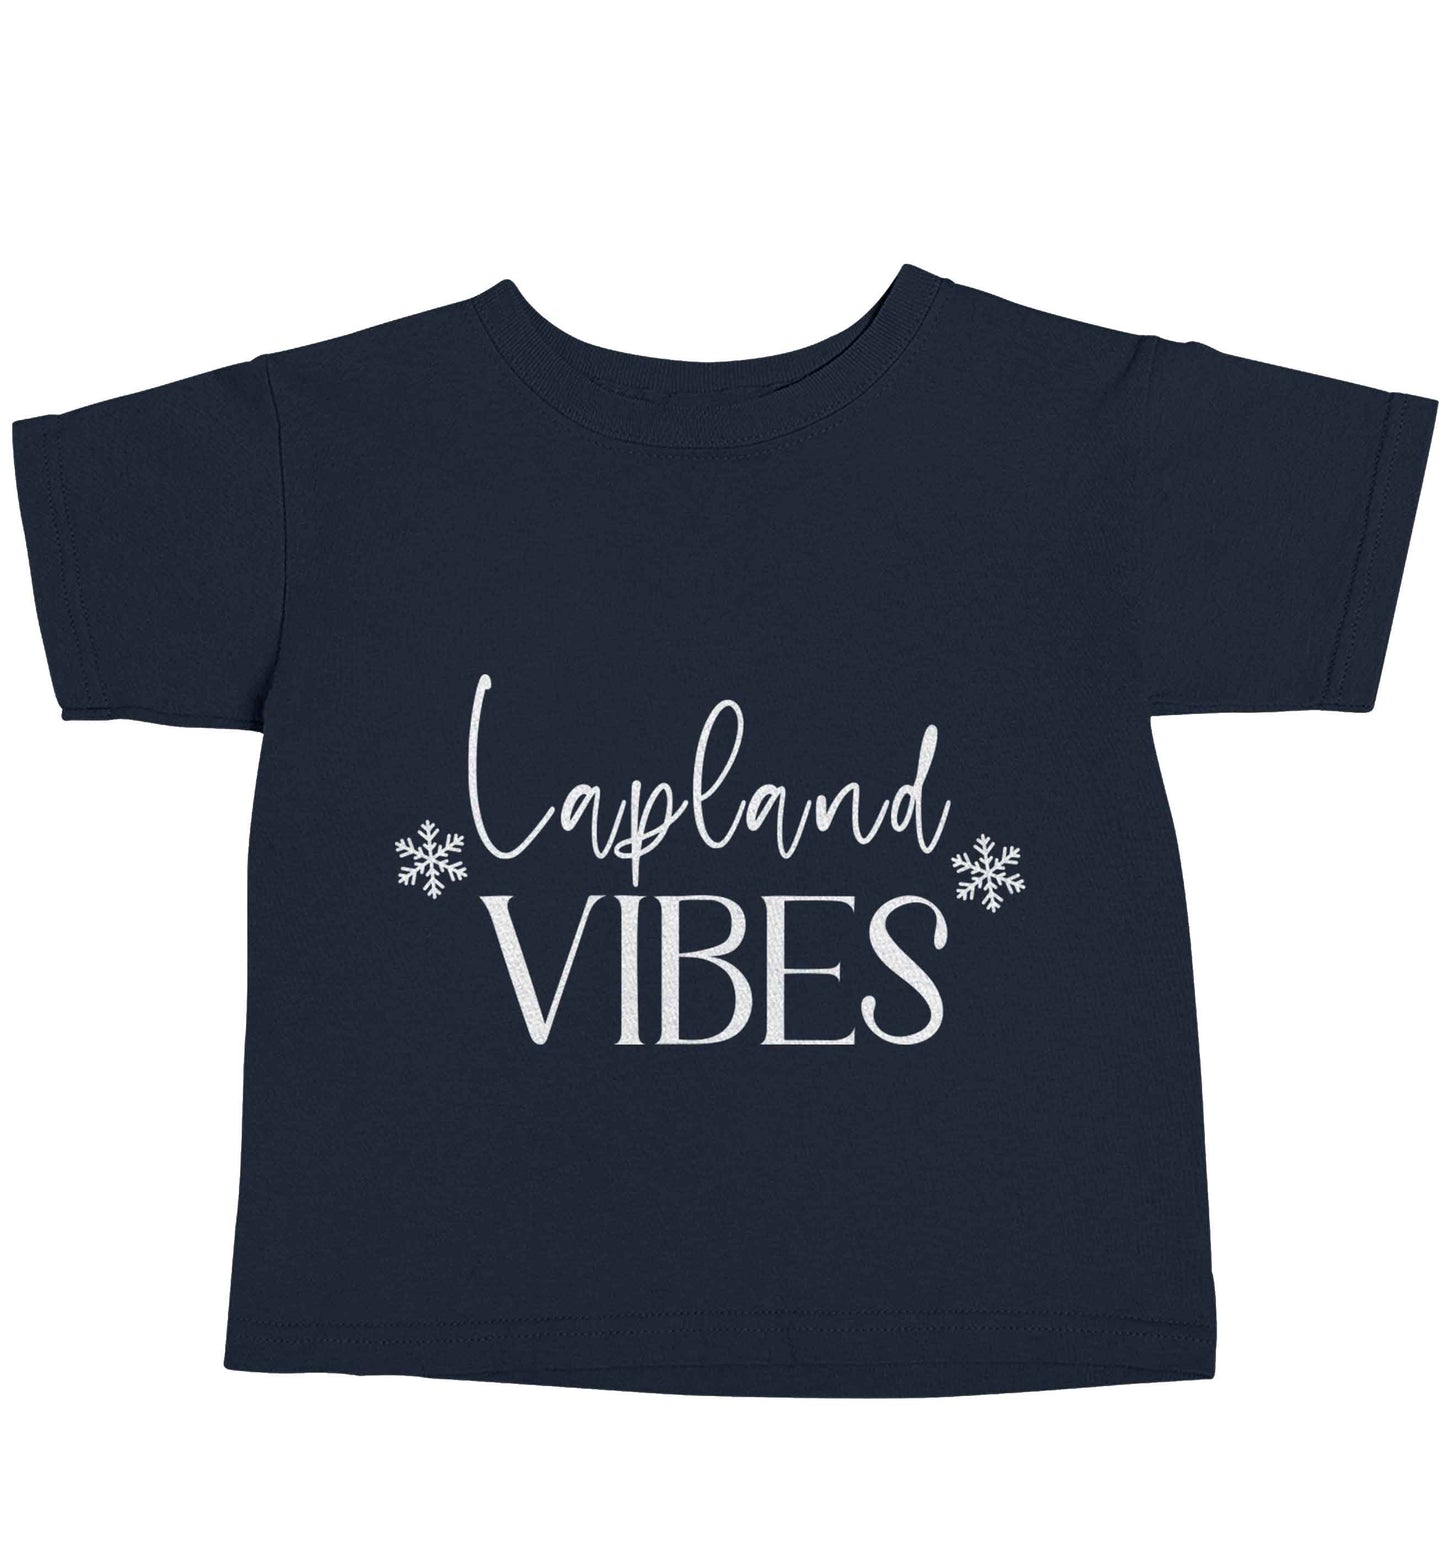 Lapland vibes navy baby toddler Tshirt 2 Years